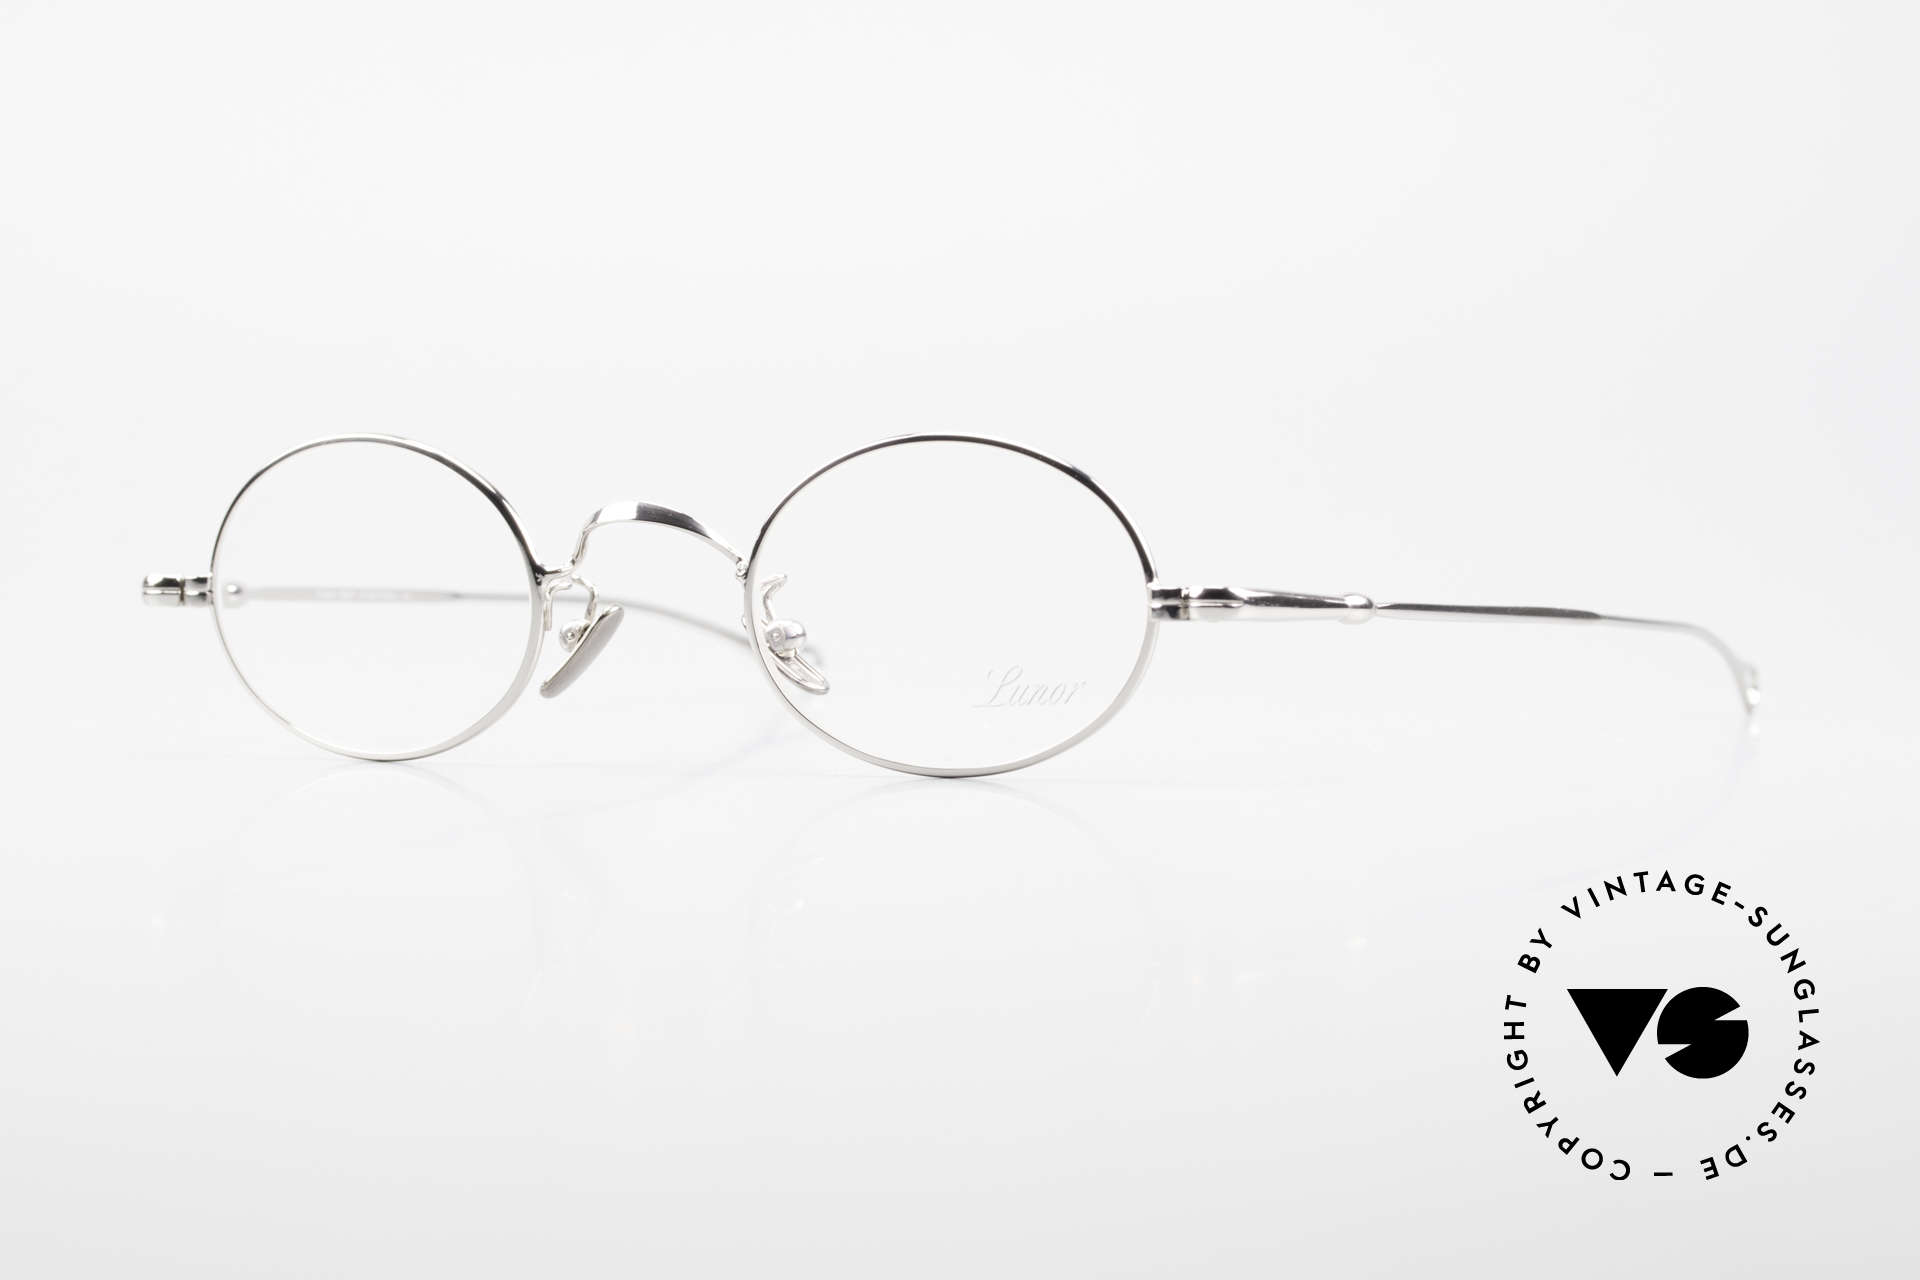 Lunor V 100 Oval Vintage Lunor Glasses, LUNOR: honest craftsmanship with attention to details, Made for Men and Women